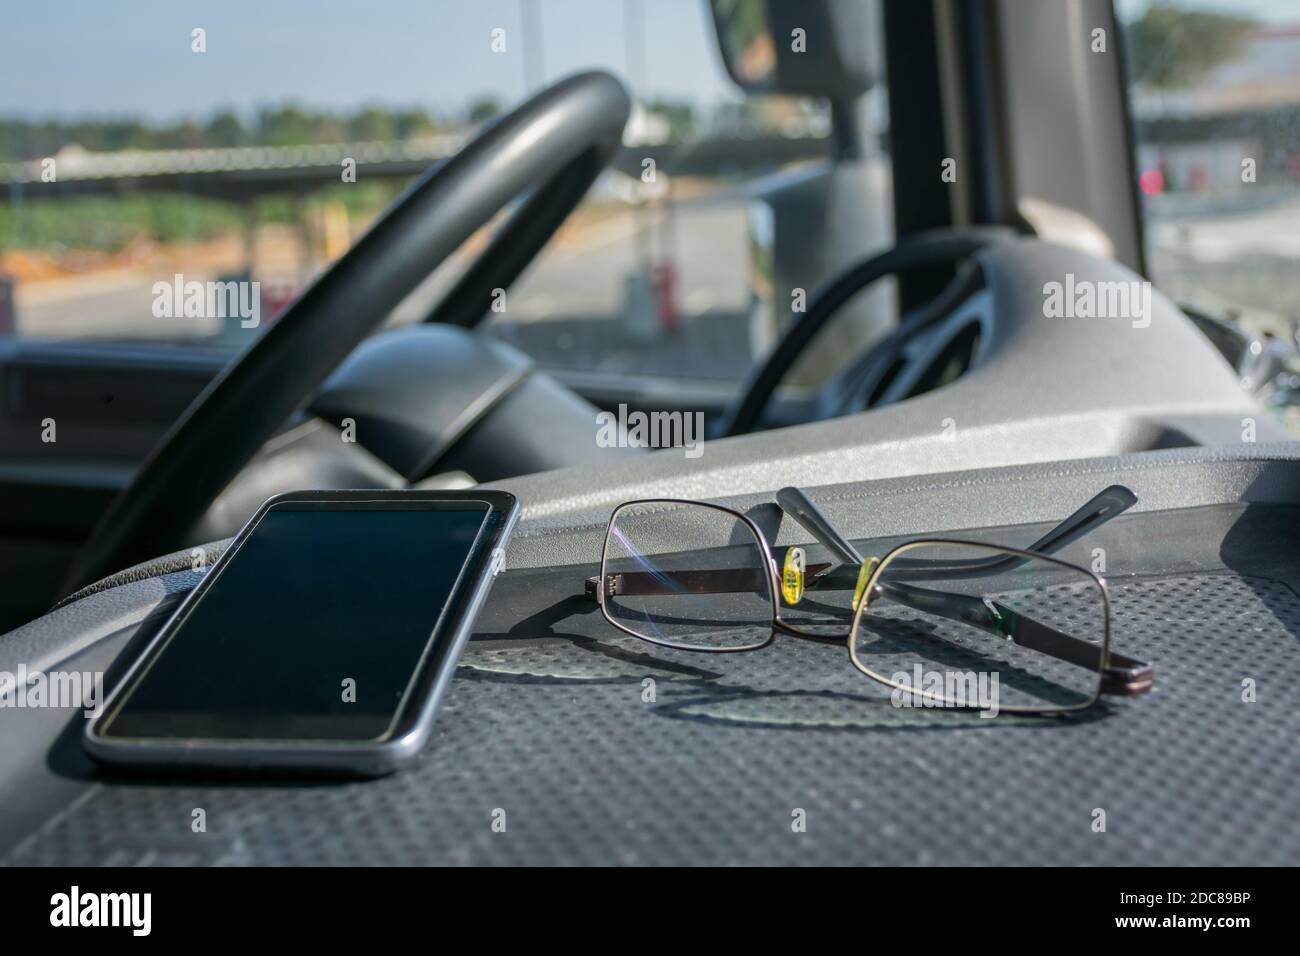 Glasses and mobile phone on the dashboard of a truck. Stock Photo